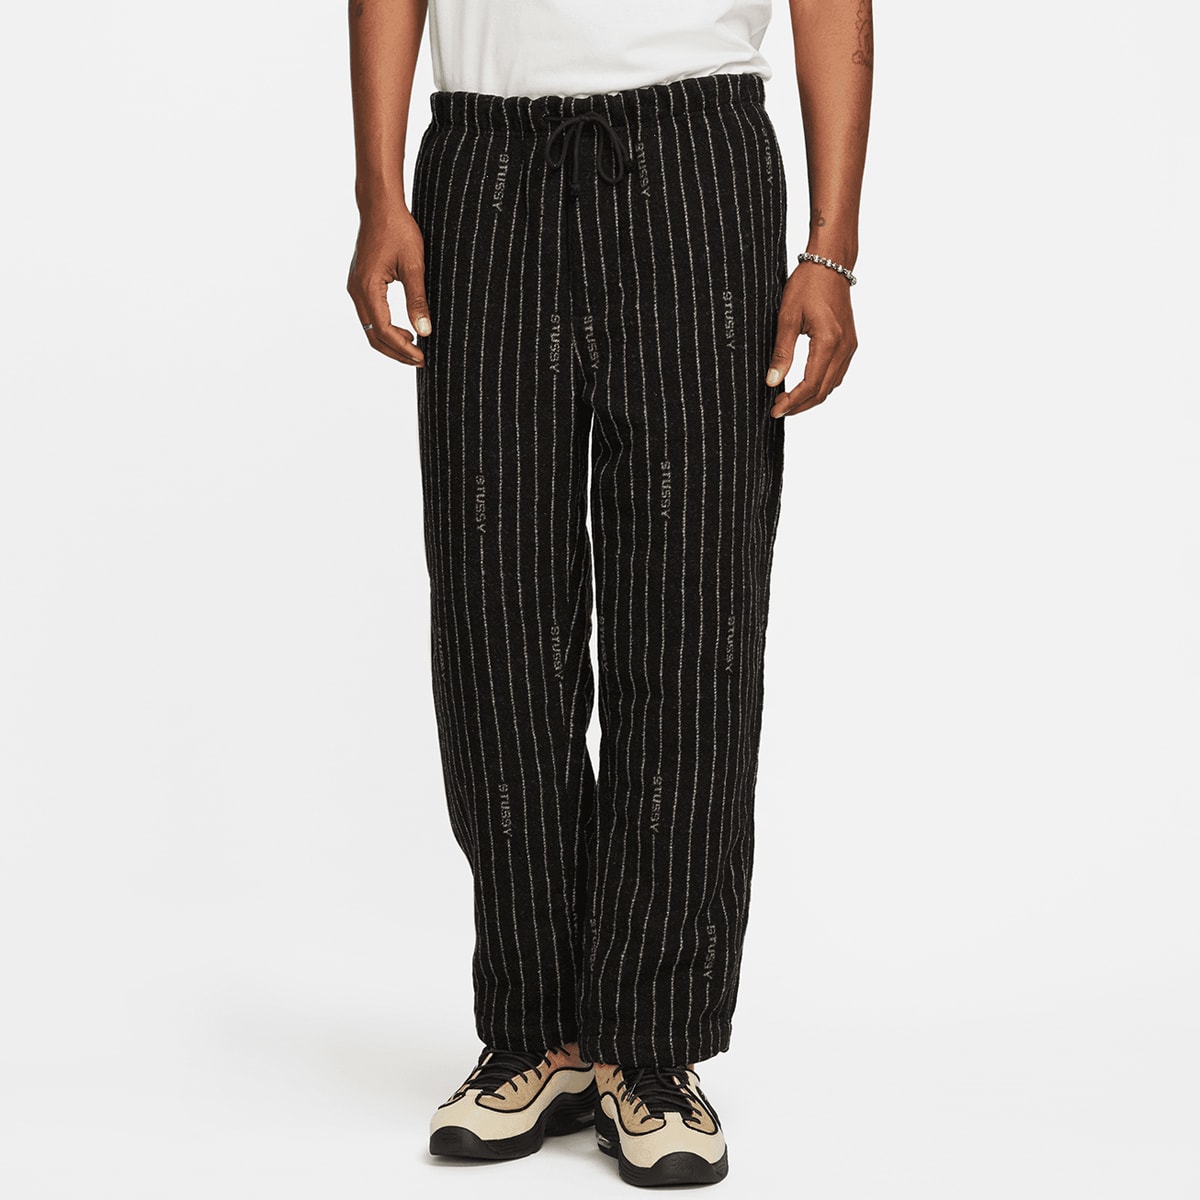 Nike x Stussy Stripe Wool Pant (Antique Black) | END. Launches